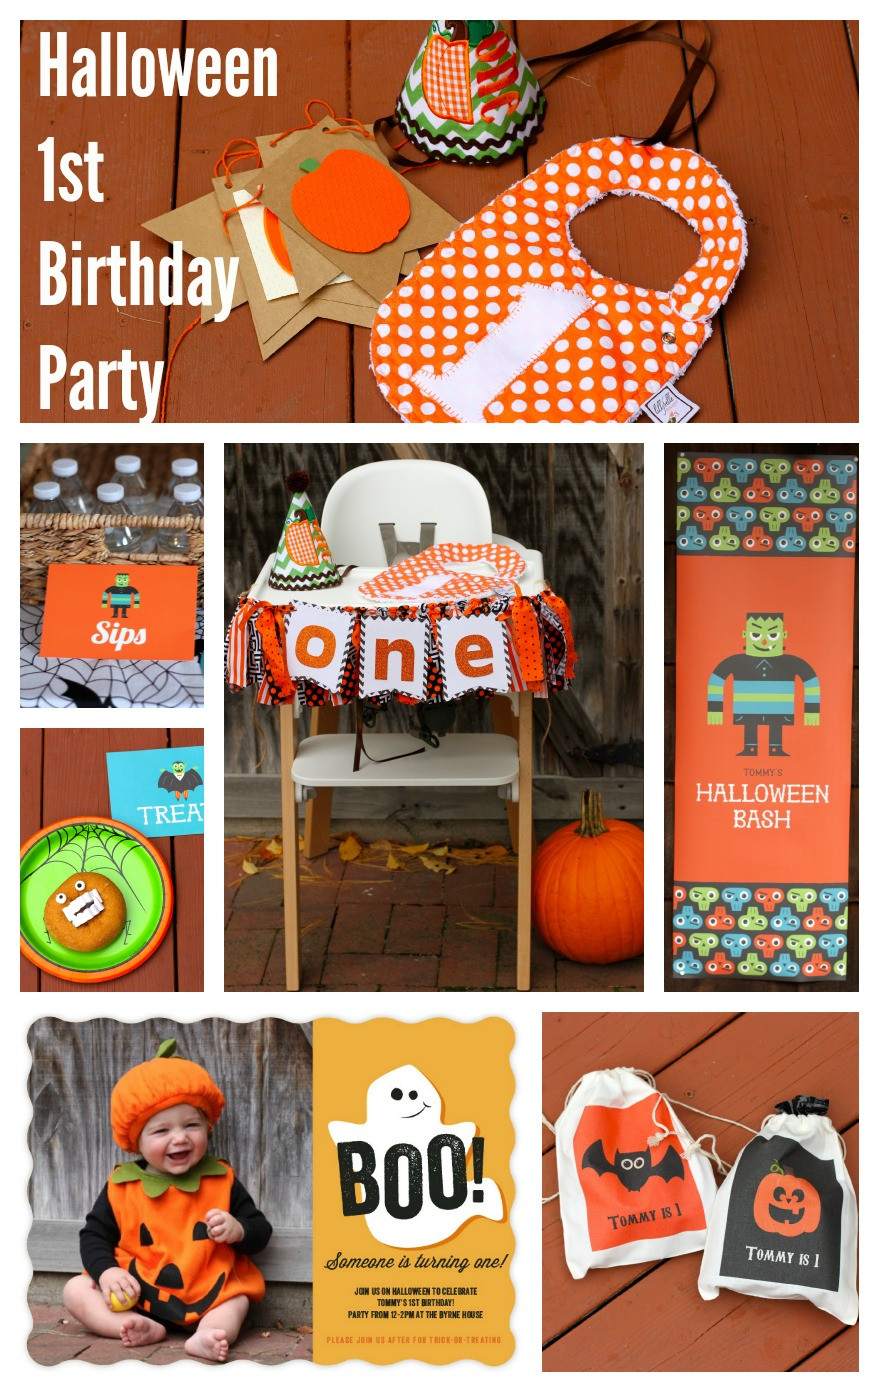 Birthday Halloween Party Ideas
 A Halloween First Birthday Party Invites Decor and Party